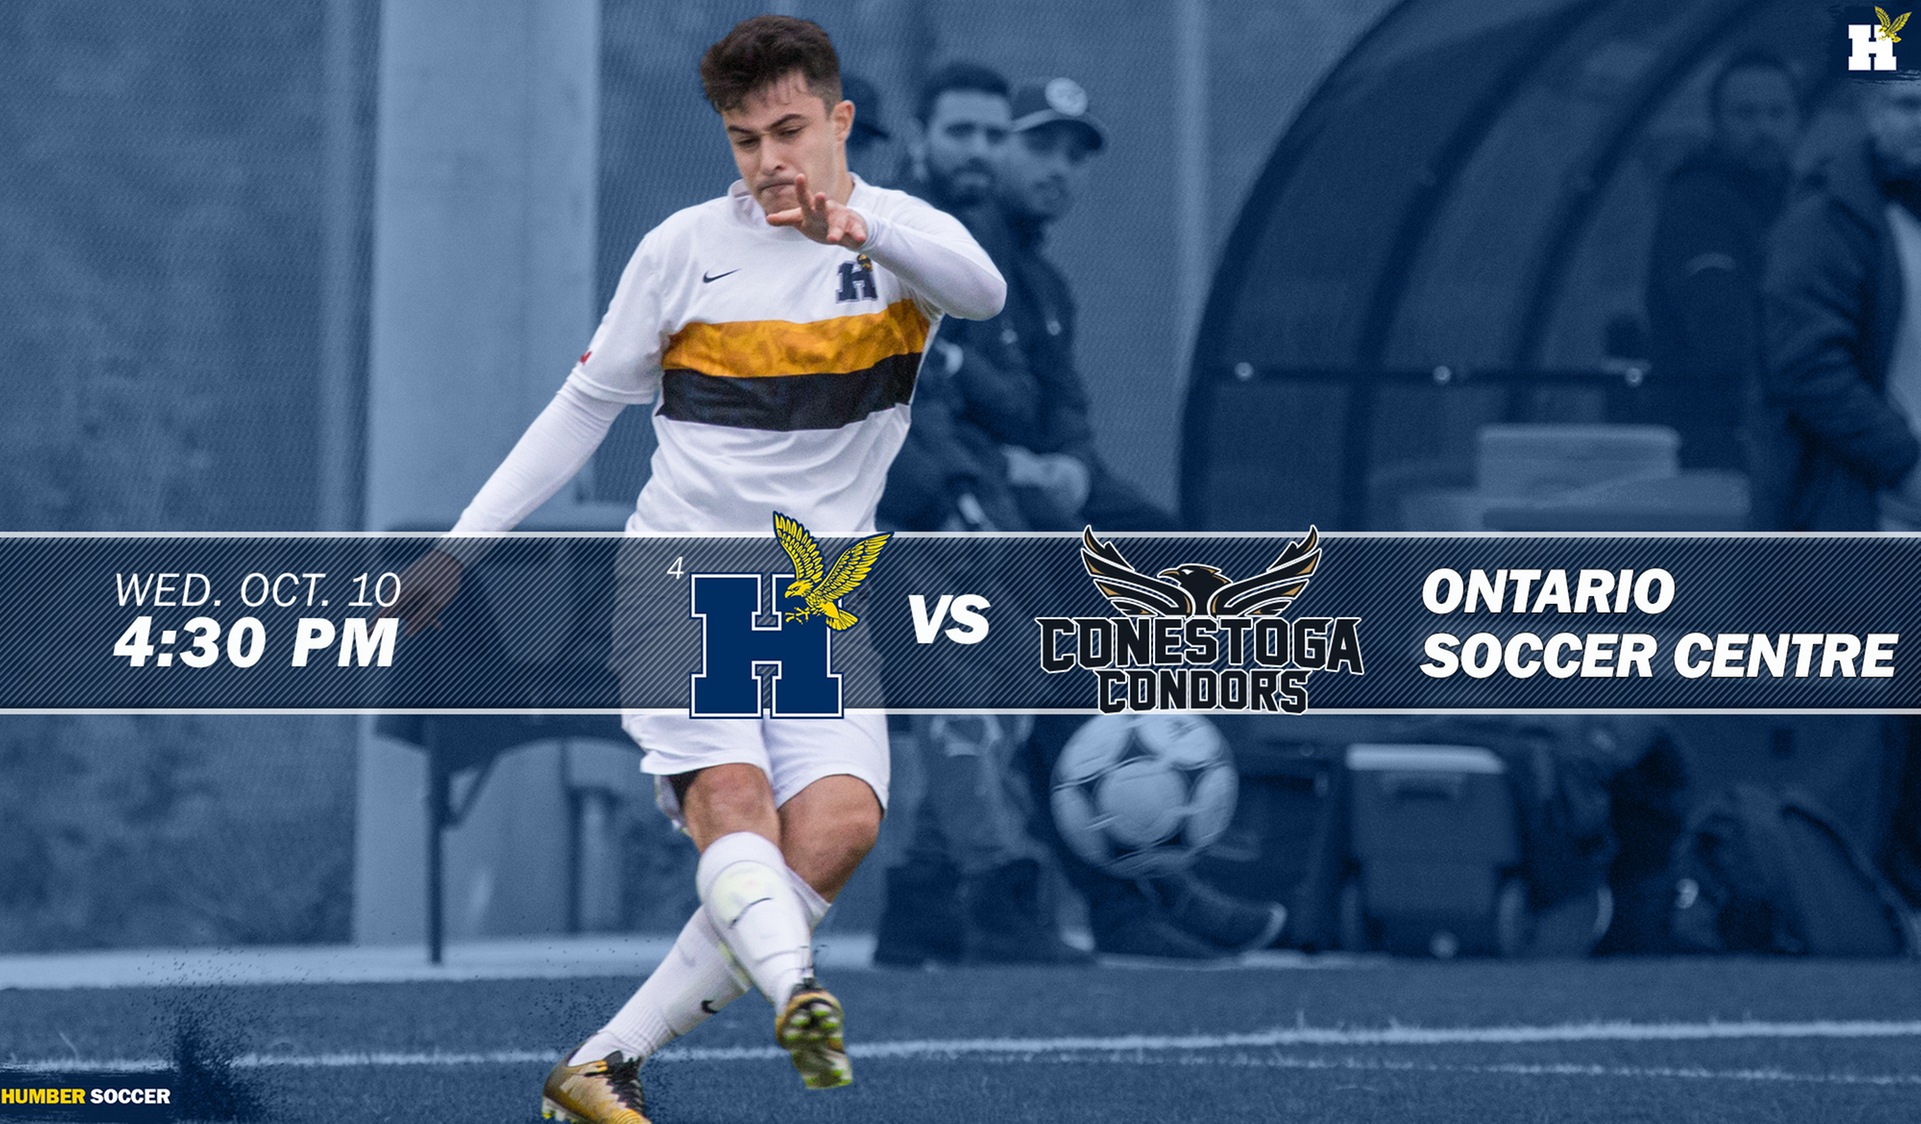 HOME SCHEDULE CONCLUDES WEDNESDAY FOR No. 4 MEN'S SOCCER